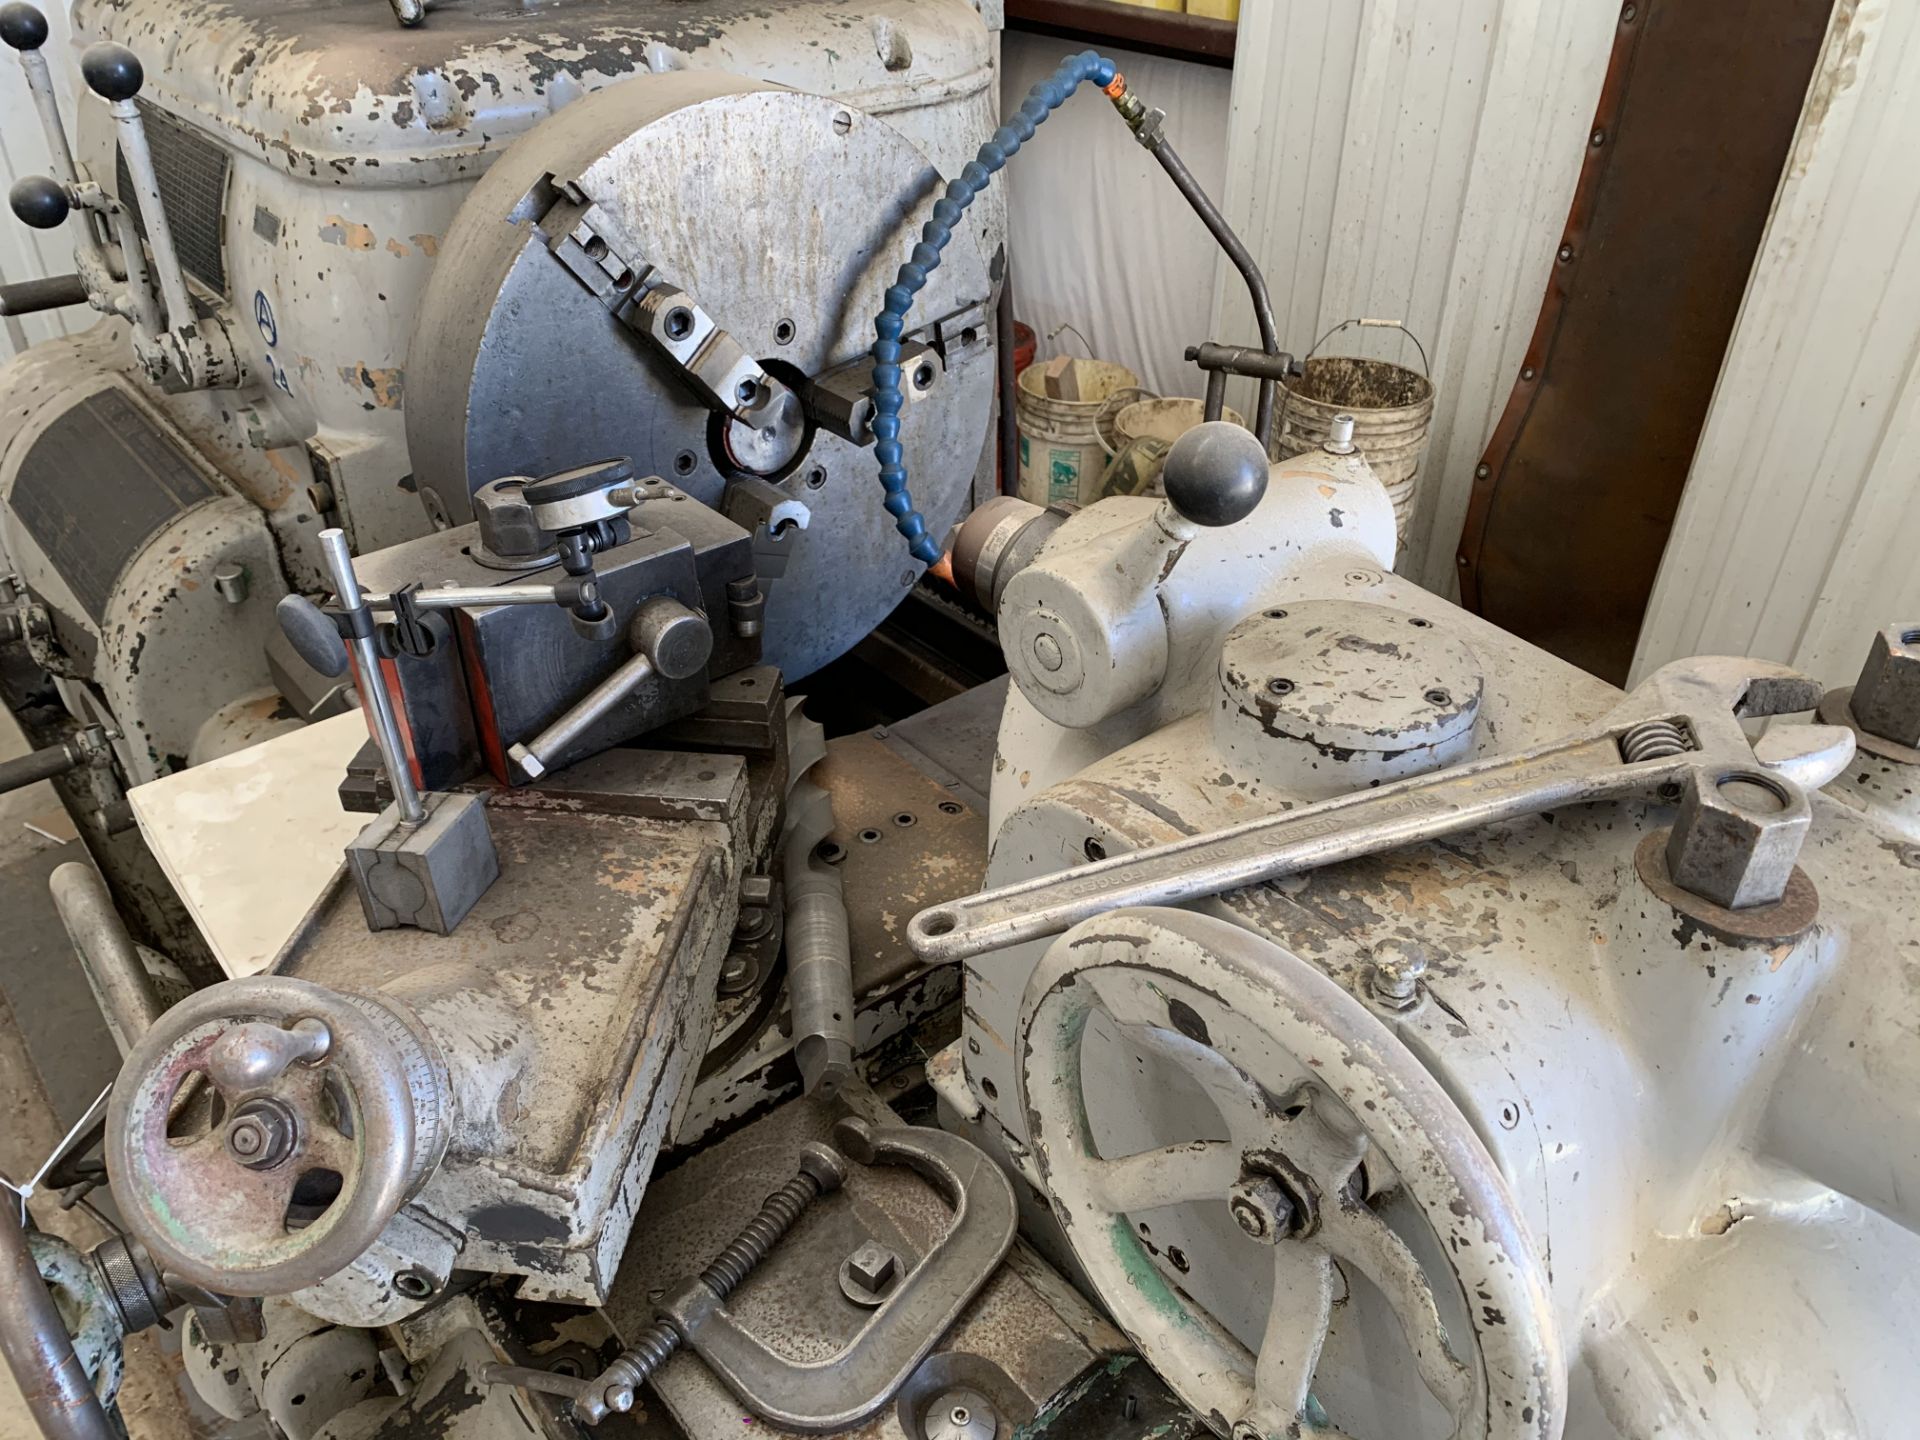 Axelson A24 Lathe, 24” x 72” Capacity (MUST BE REMOVED BY NOVEMBER 16, 2022) - Image 2 of 6